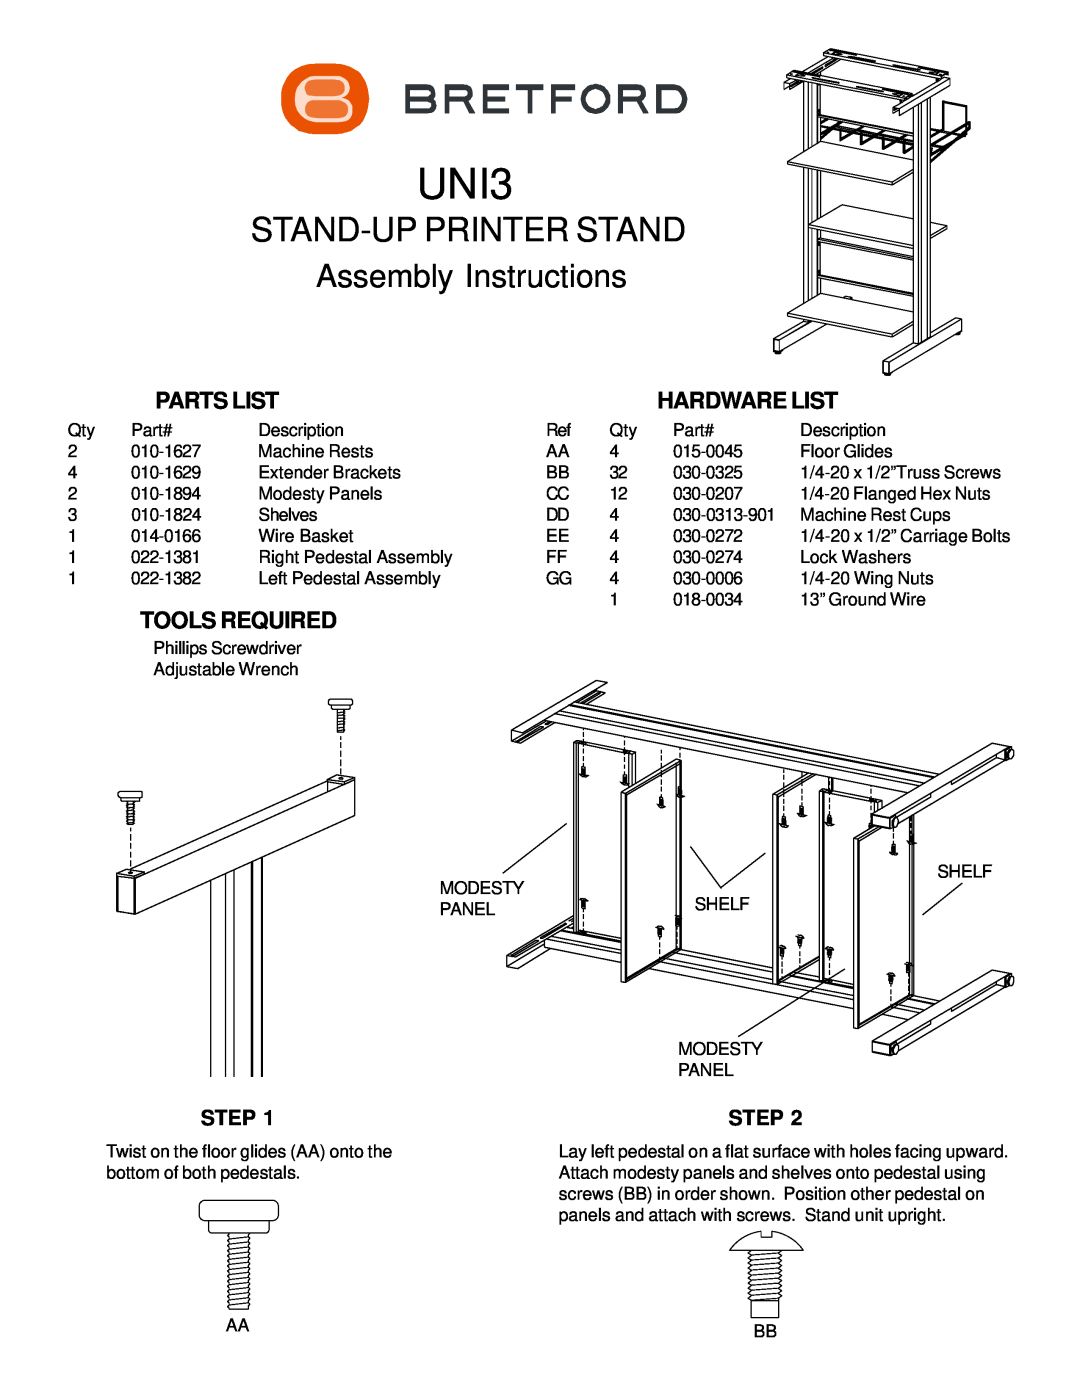 Bretford UNI-3 manual Step, UNI3, Stand-Upprinter Stand, Assembly Instructions, Parts List, Hardware List, Tools Required 